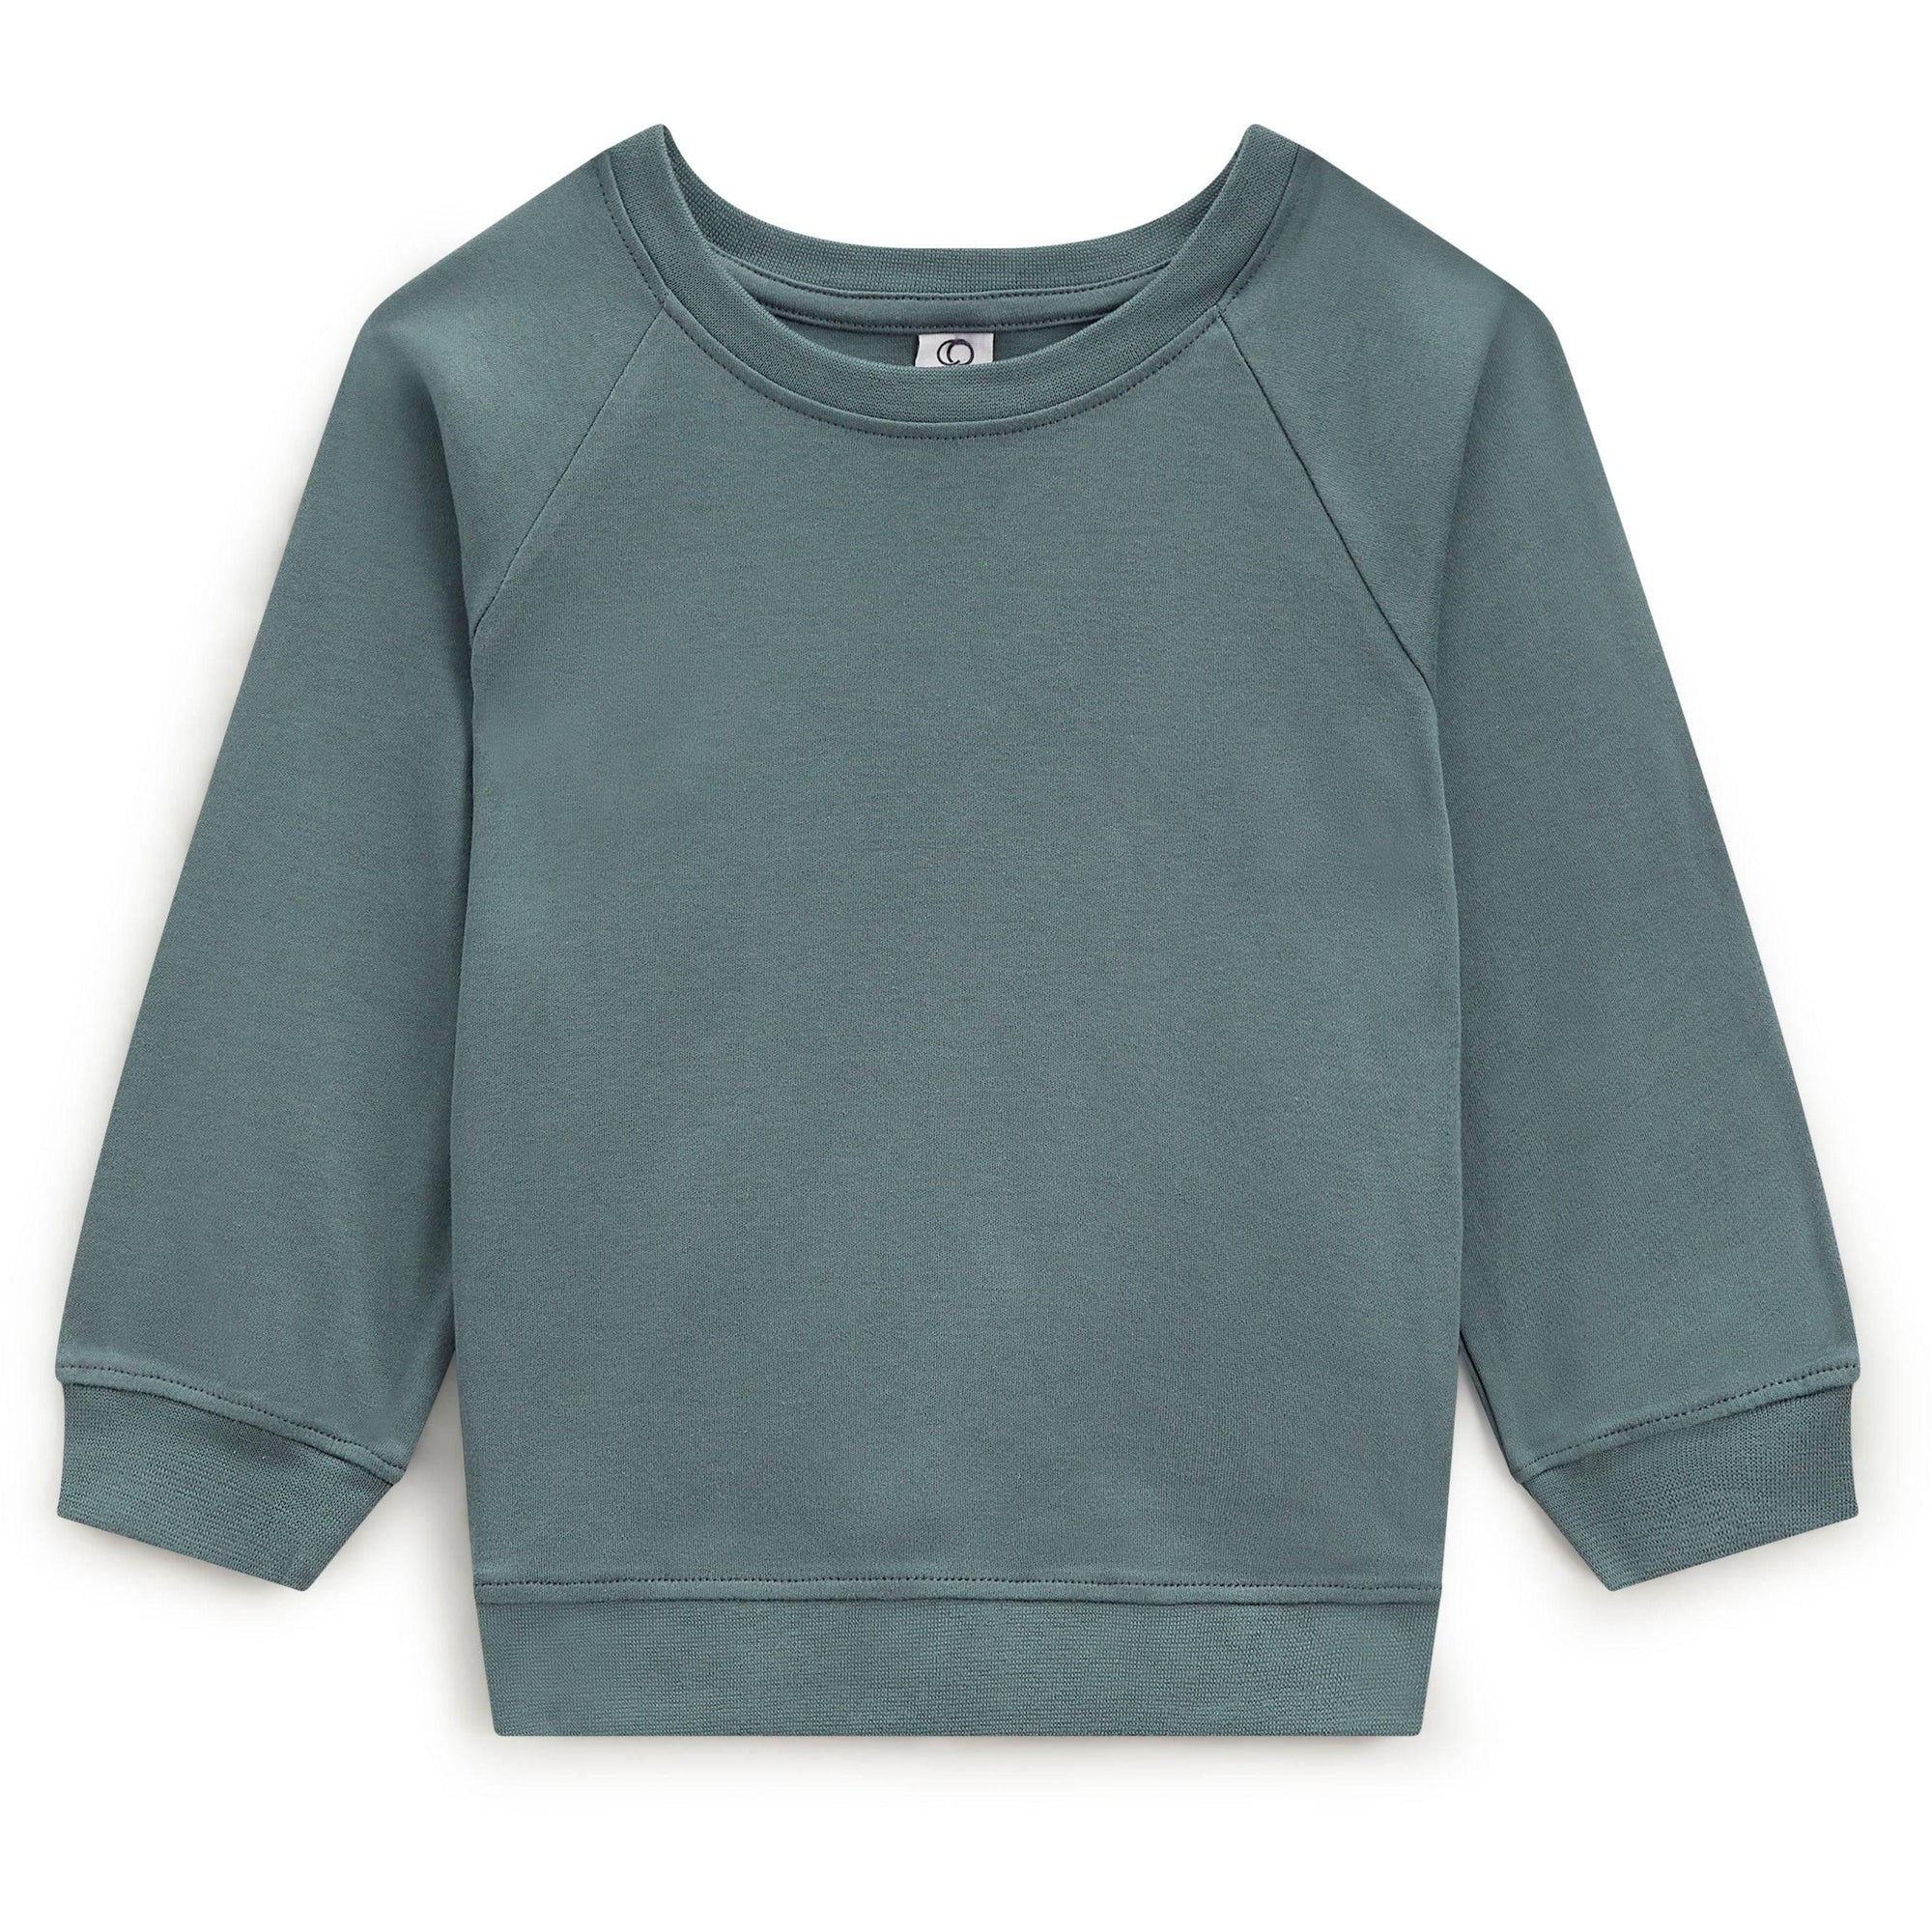 Colored Organics • Unisex Portland Pullover - All Things Dylan